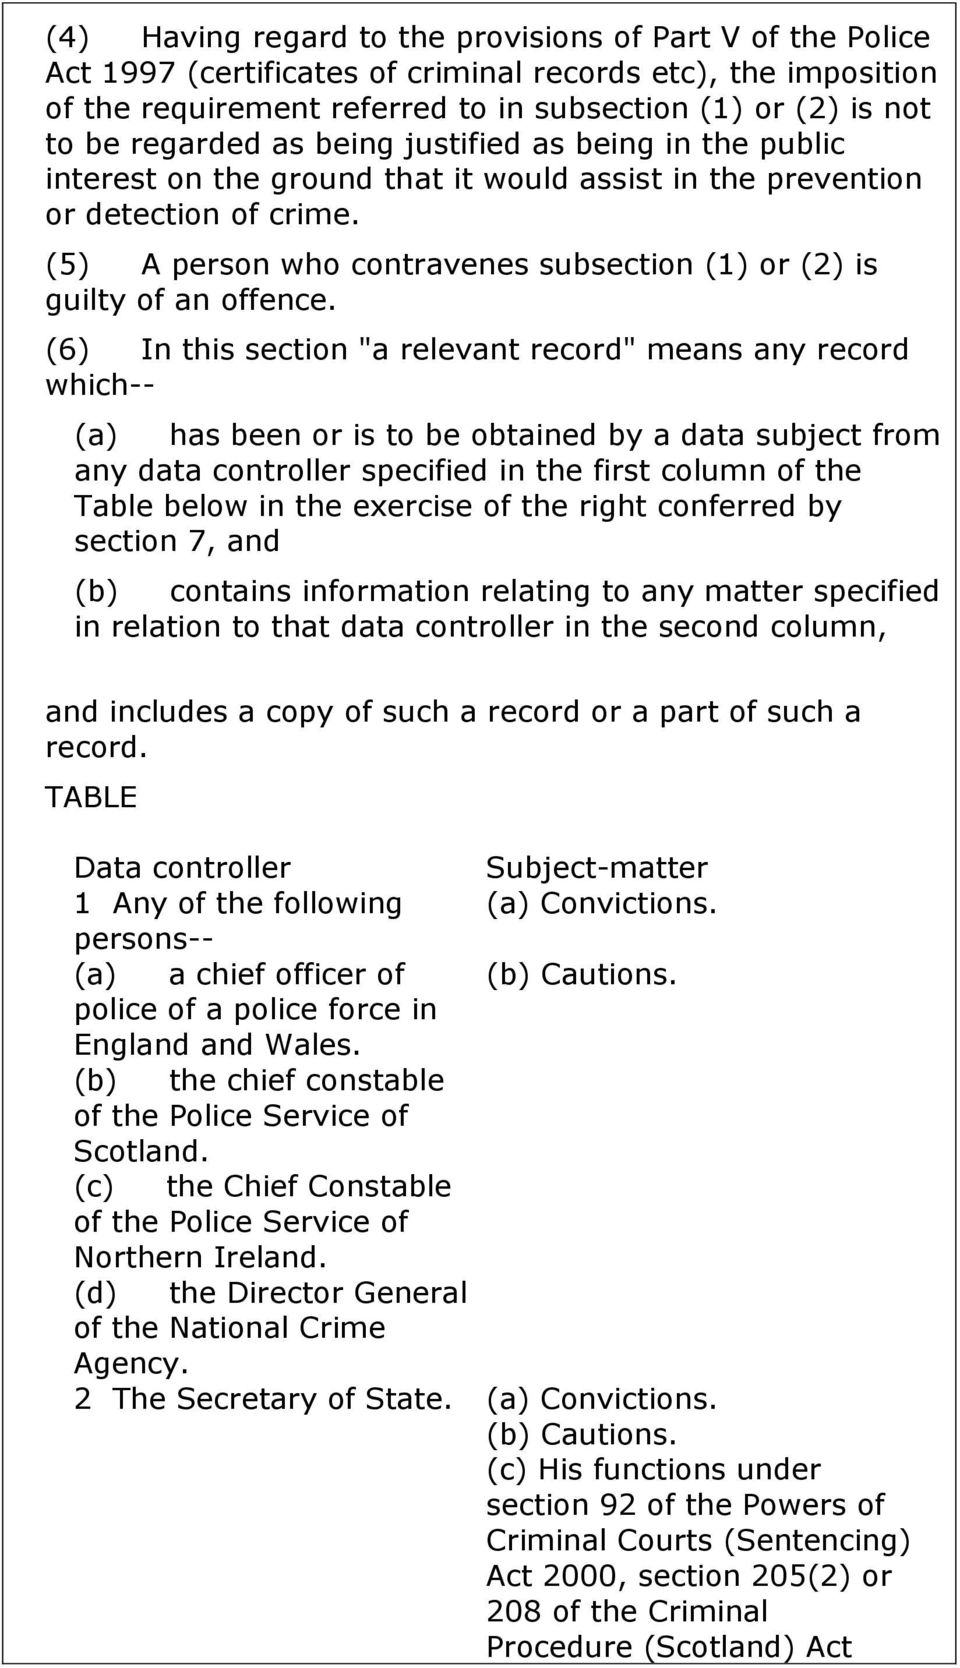 (5) A person who contravenes subsection (1) or (2) is guilty of an offence.